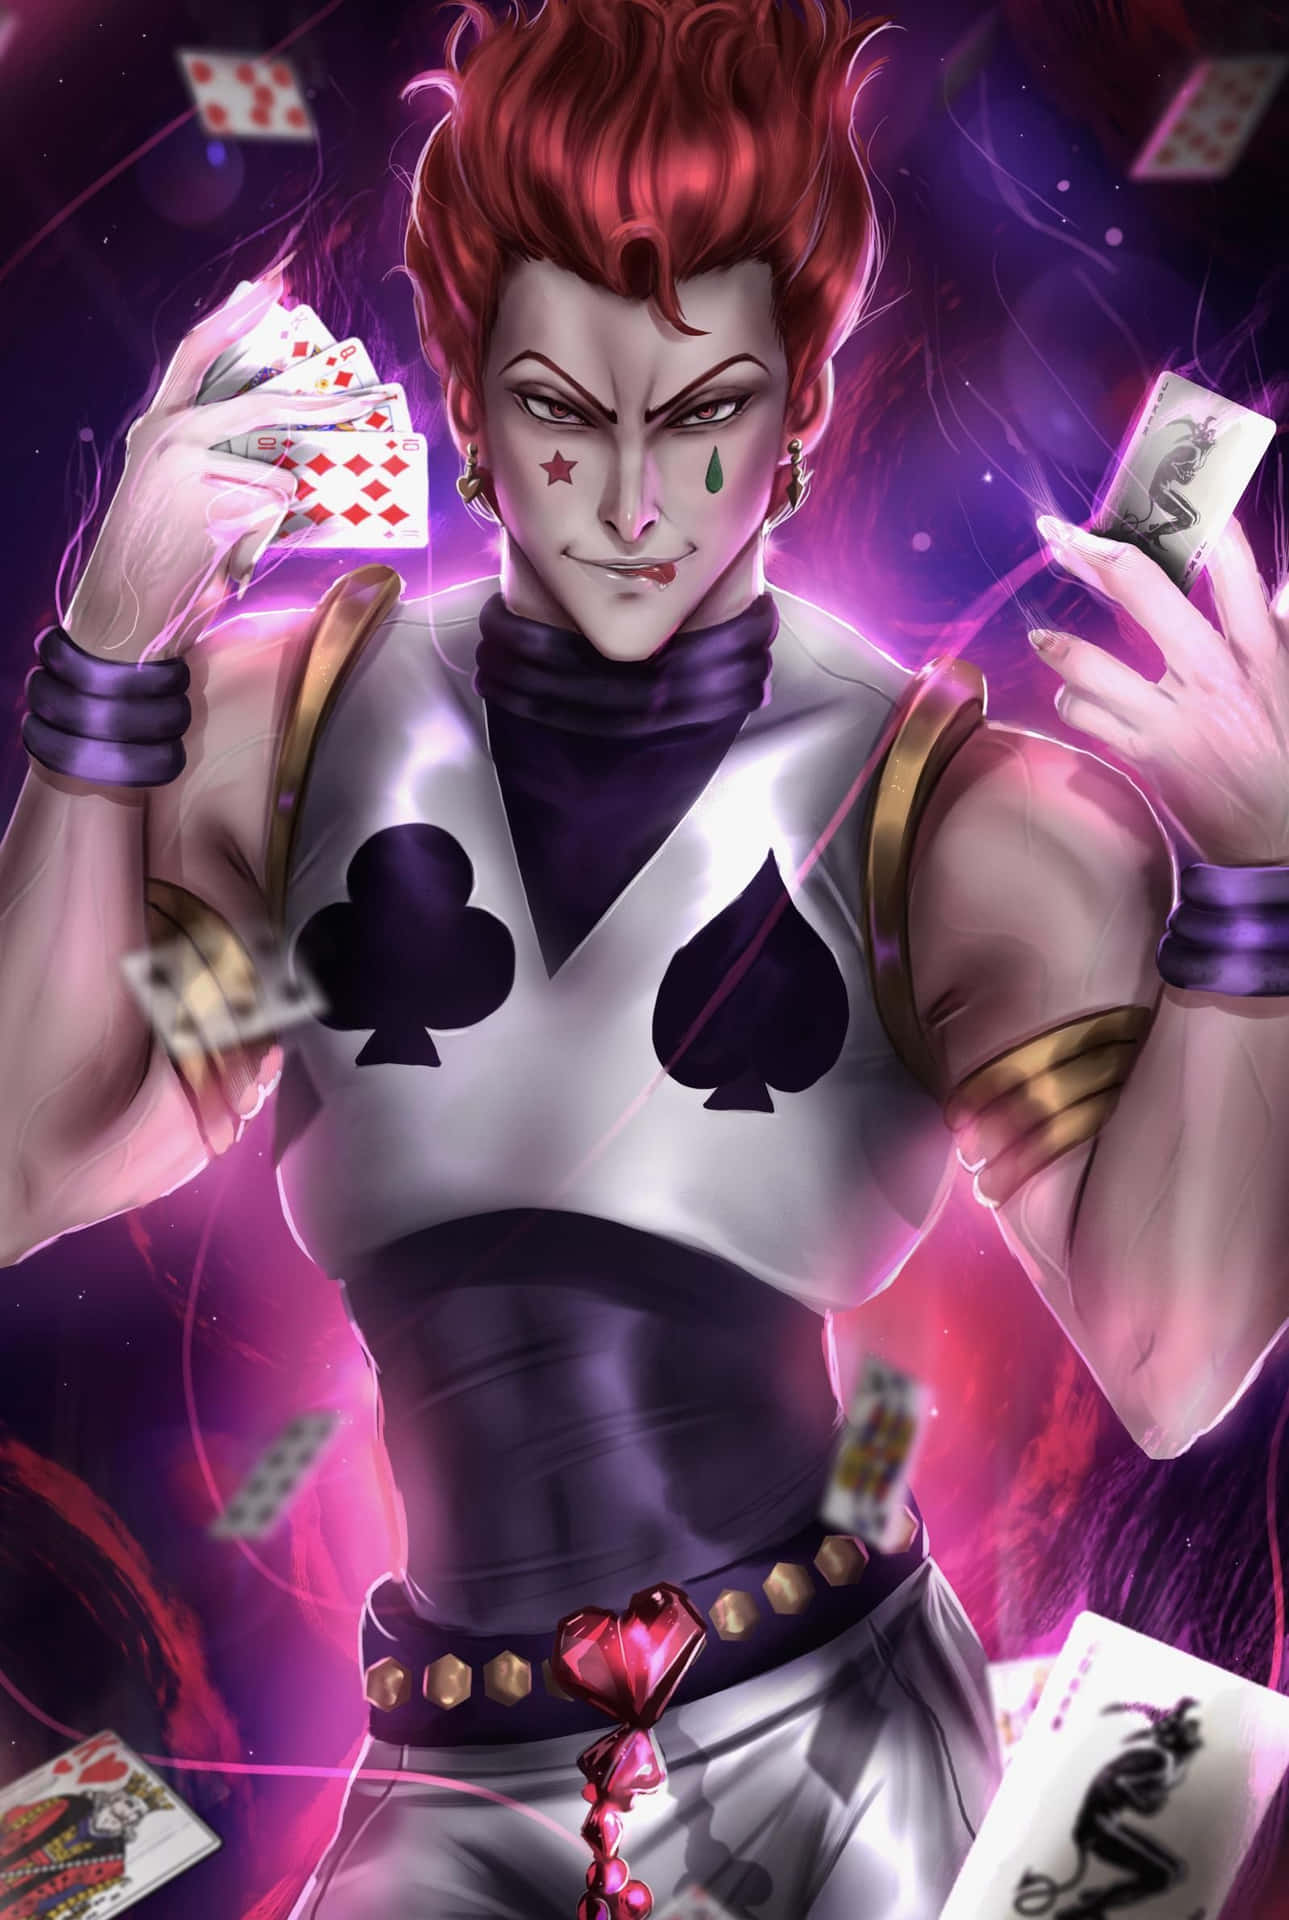 The infamous Hisoka, ready to show off his skills